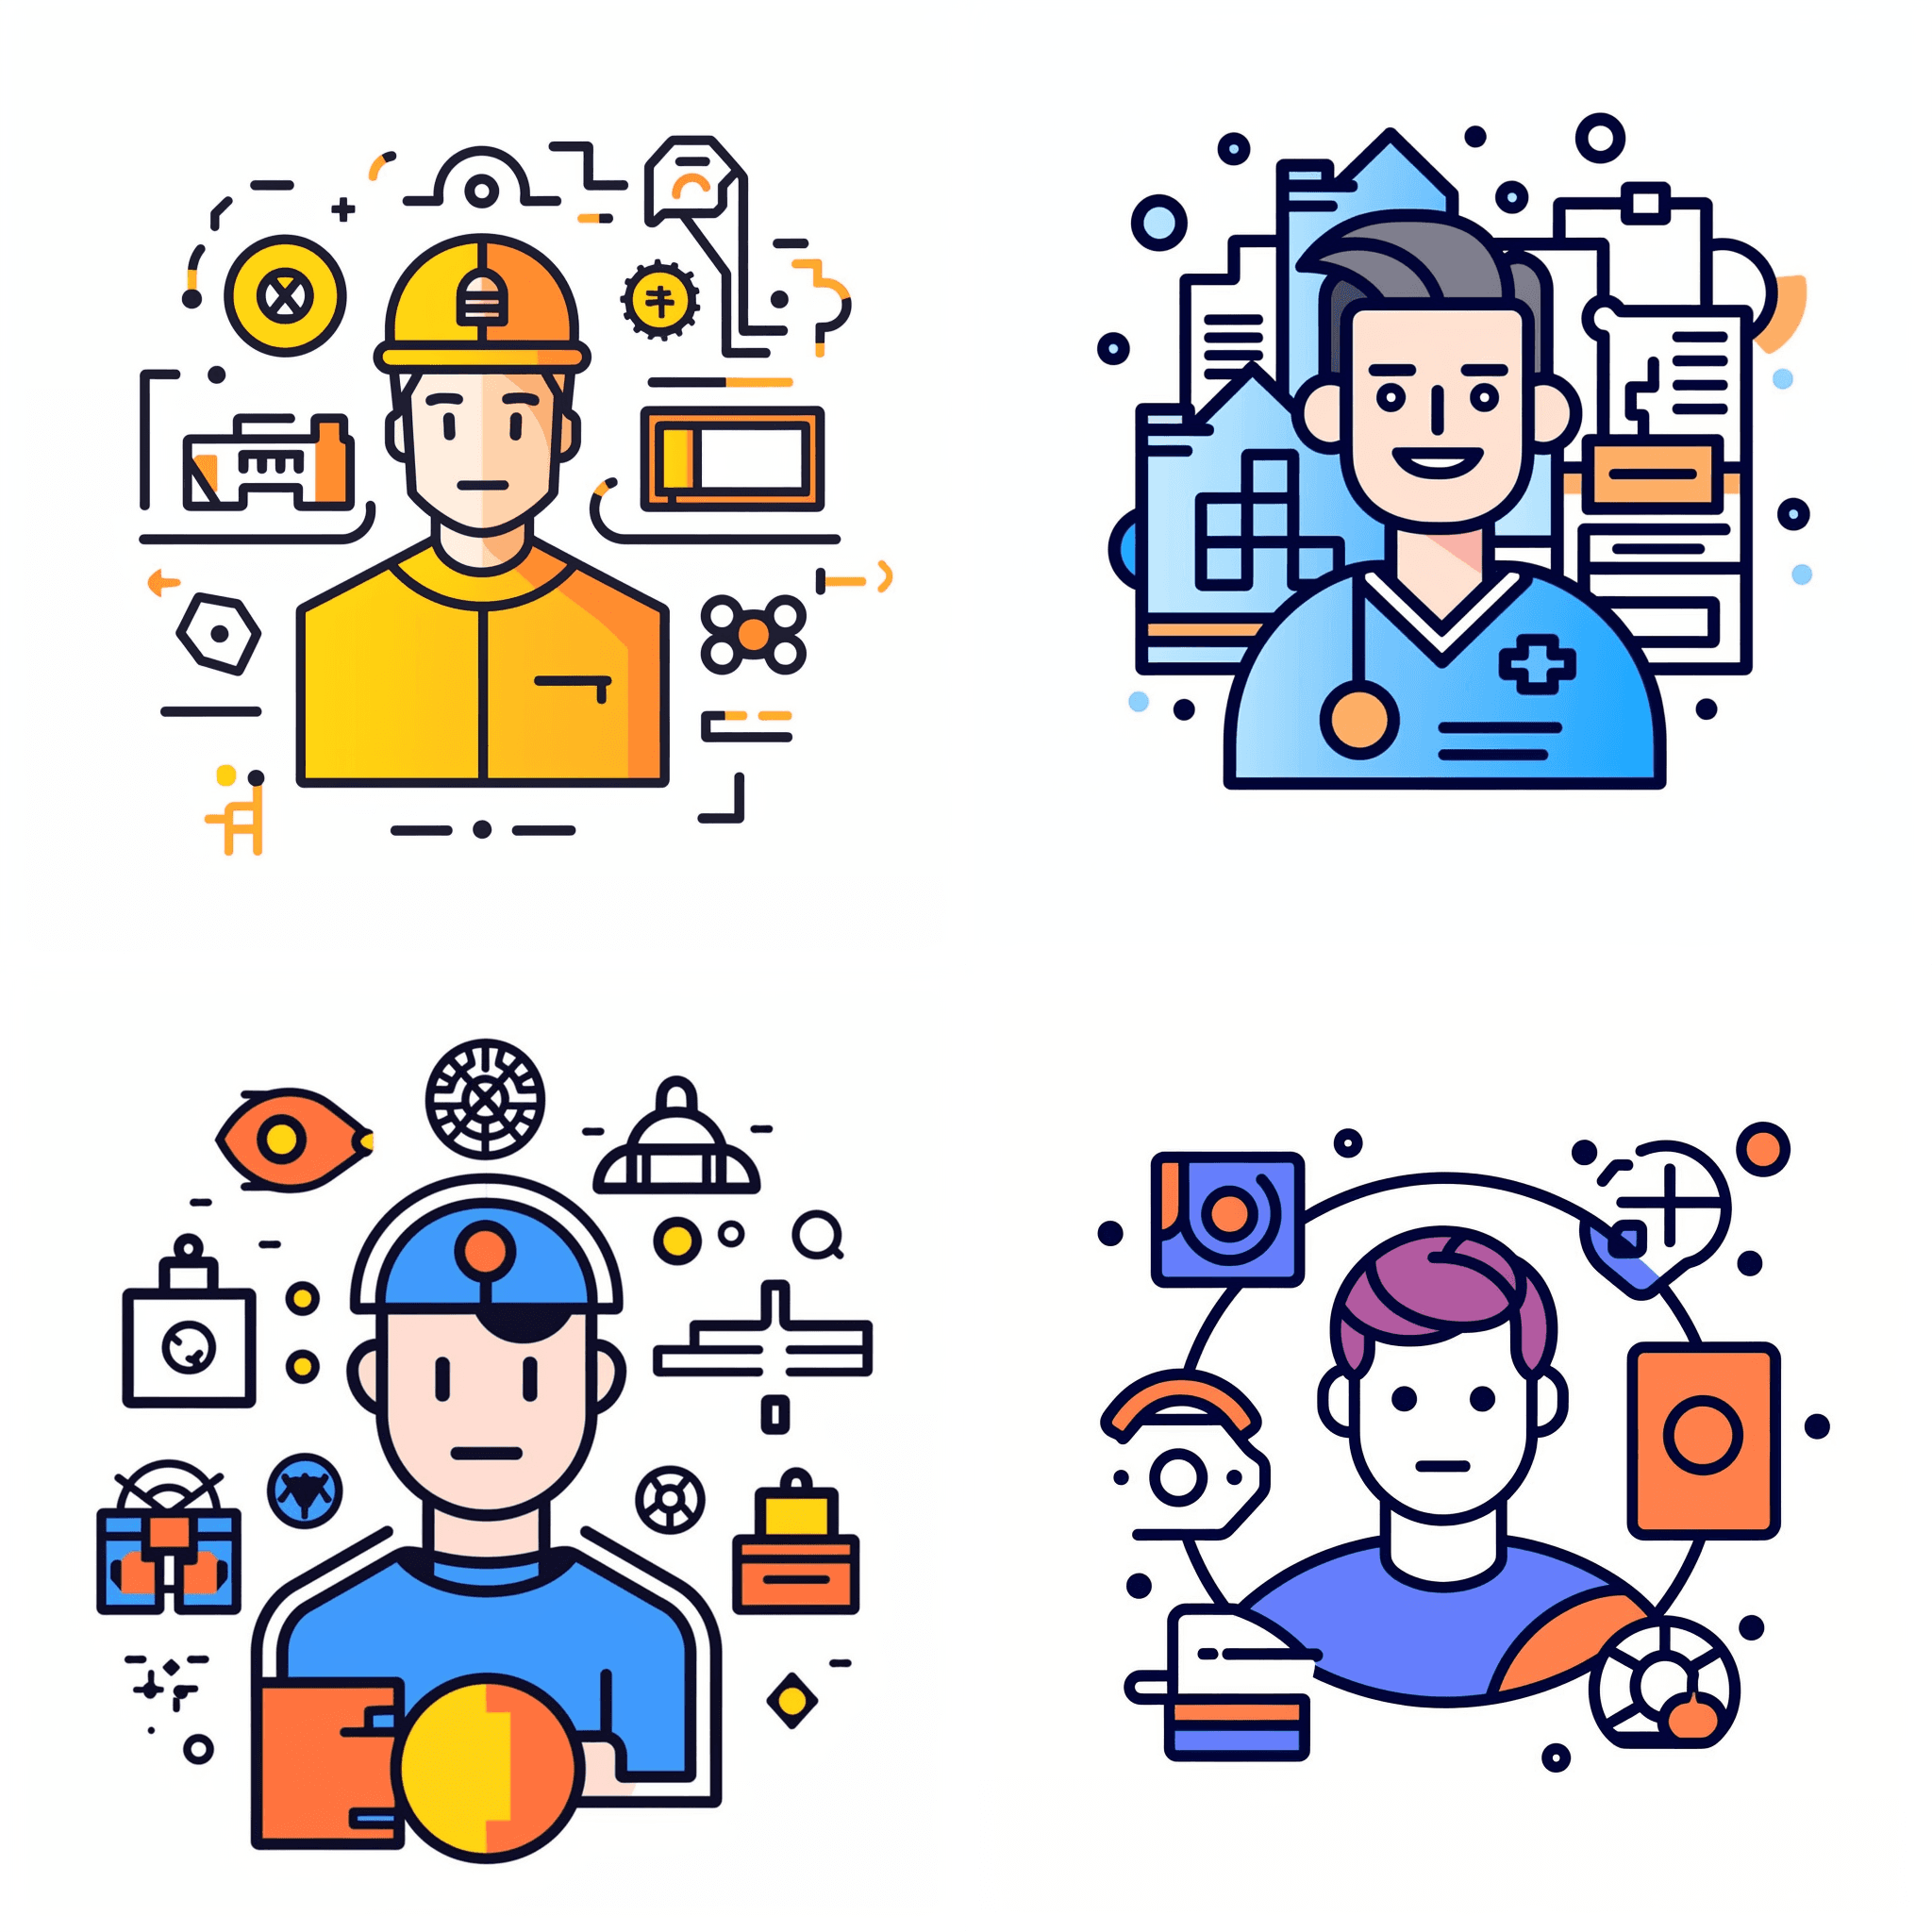 A tech guy, developer, Modern Line Icon, Vector Line Art, Cute Young Character Avatar, Smiling, Icon Design, Bold Outline, Solid Color, Pixel Perfect, Isolate, white background, Minimalistic, Bold Colors, --no glasses